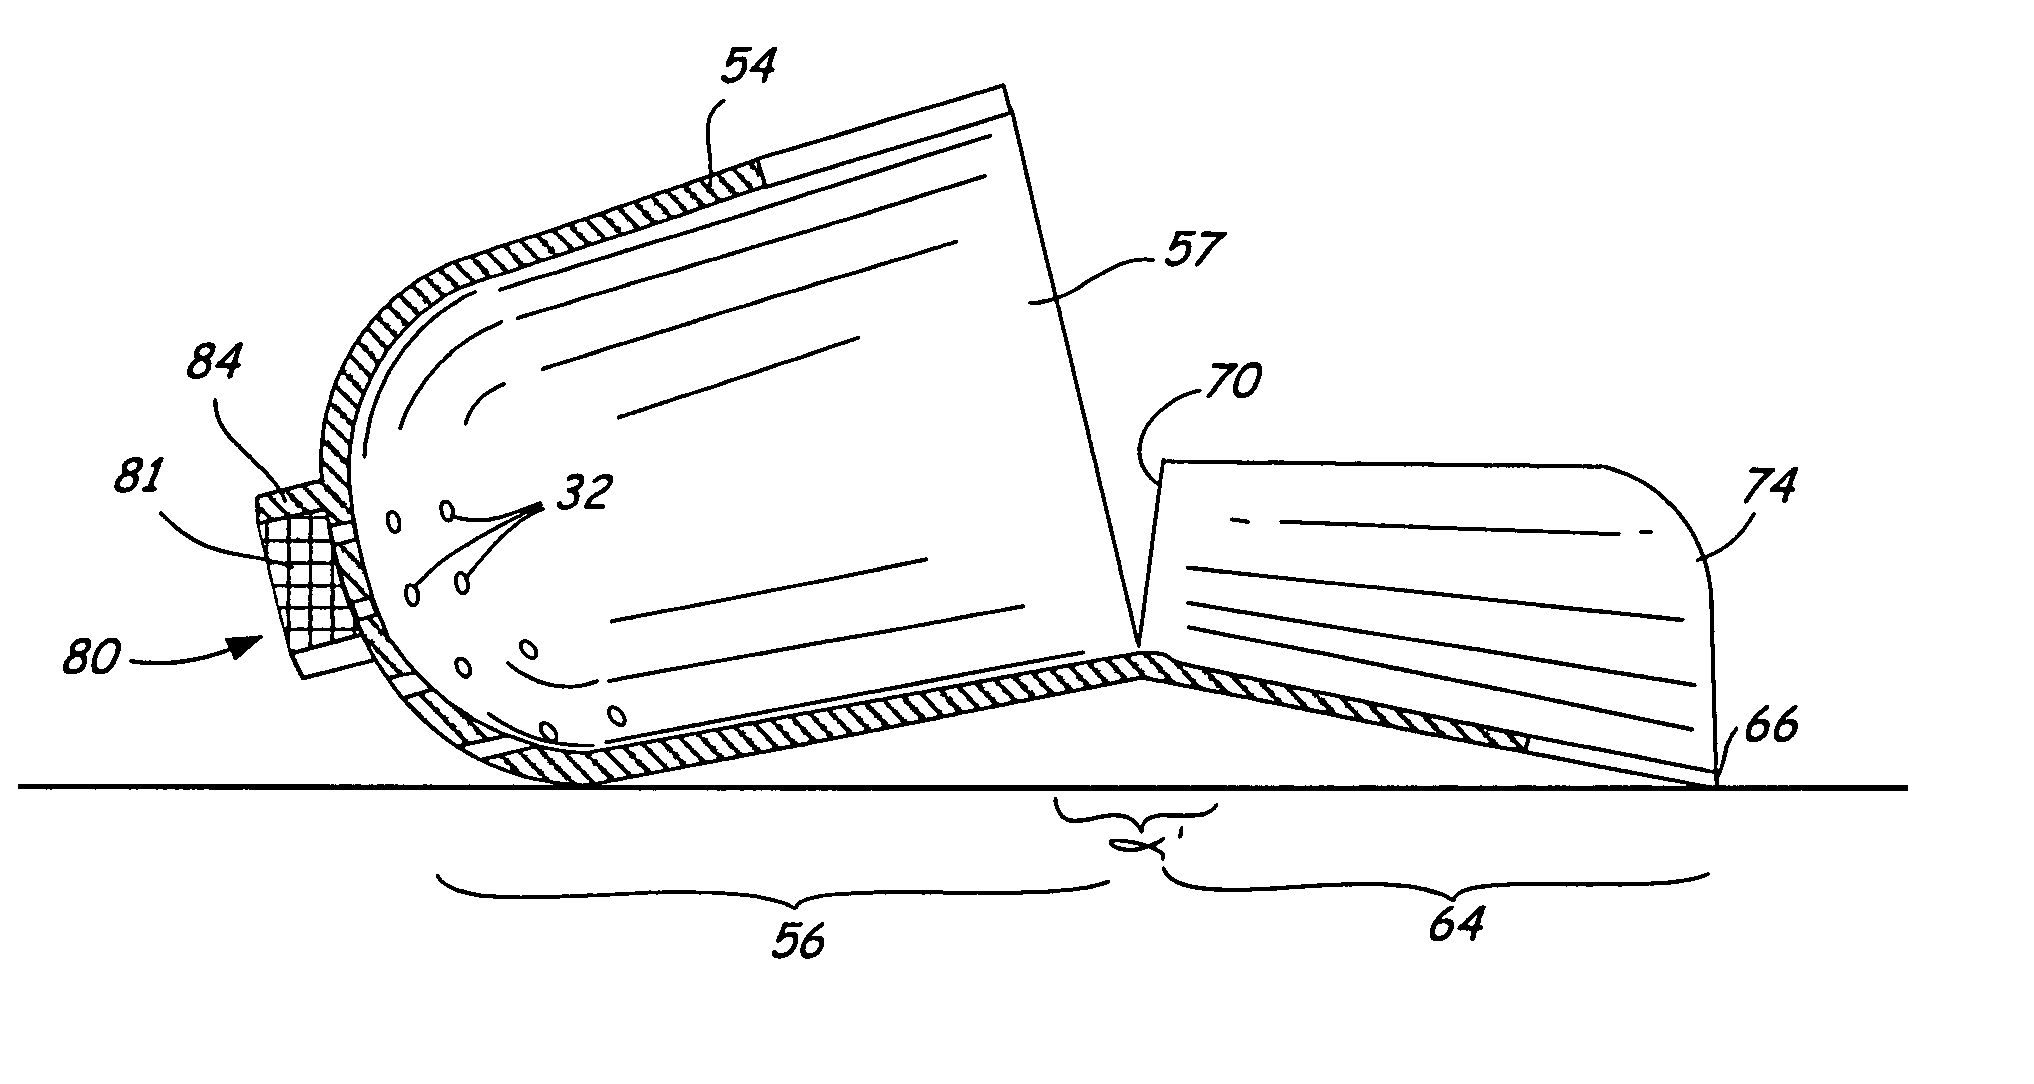 Device for collecting surgical material